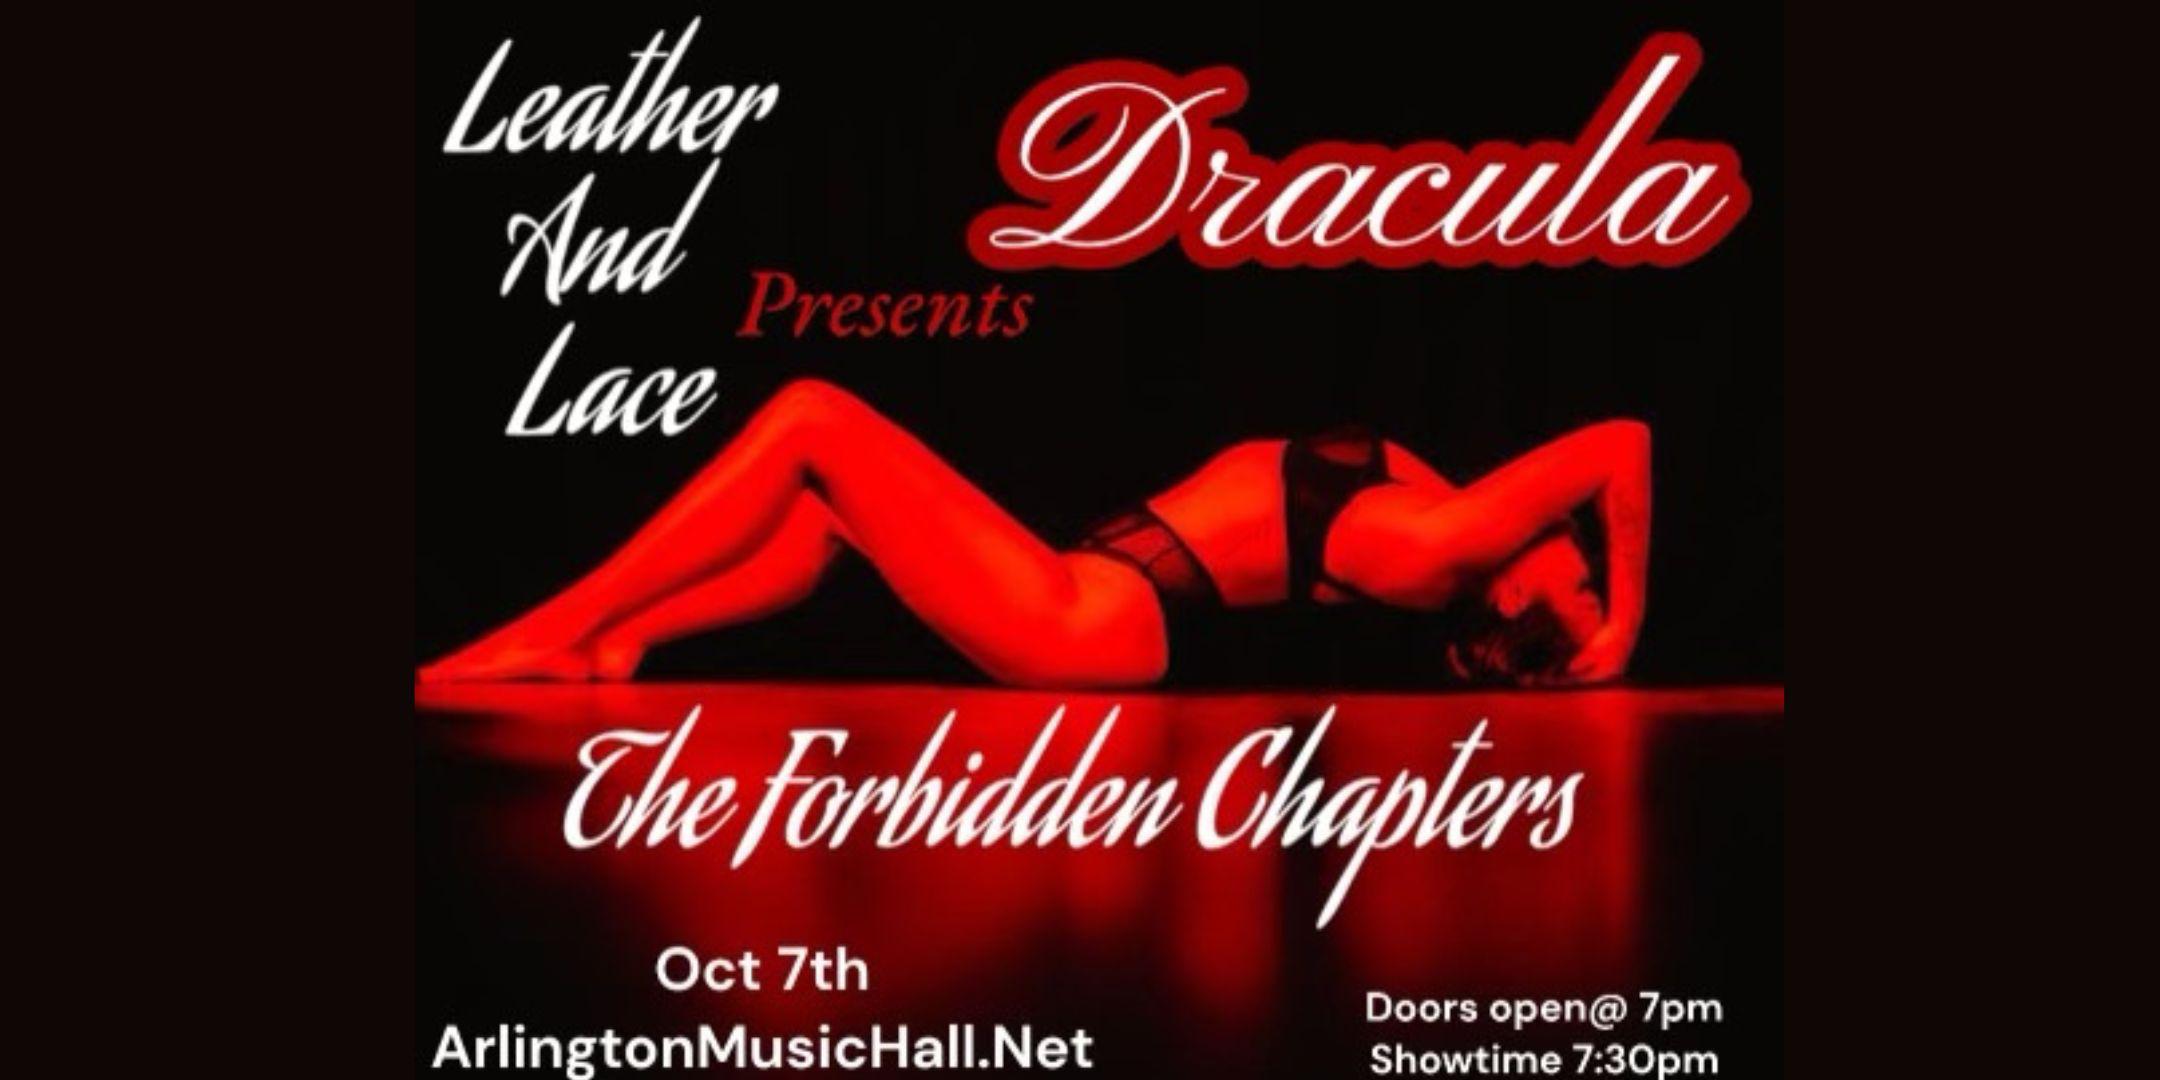 Leather and Lace Presents: Dracula The Forbidden Chapters